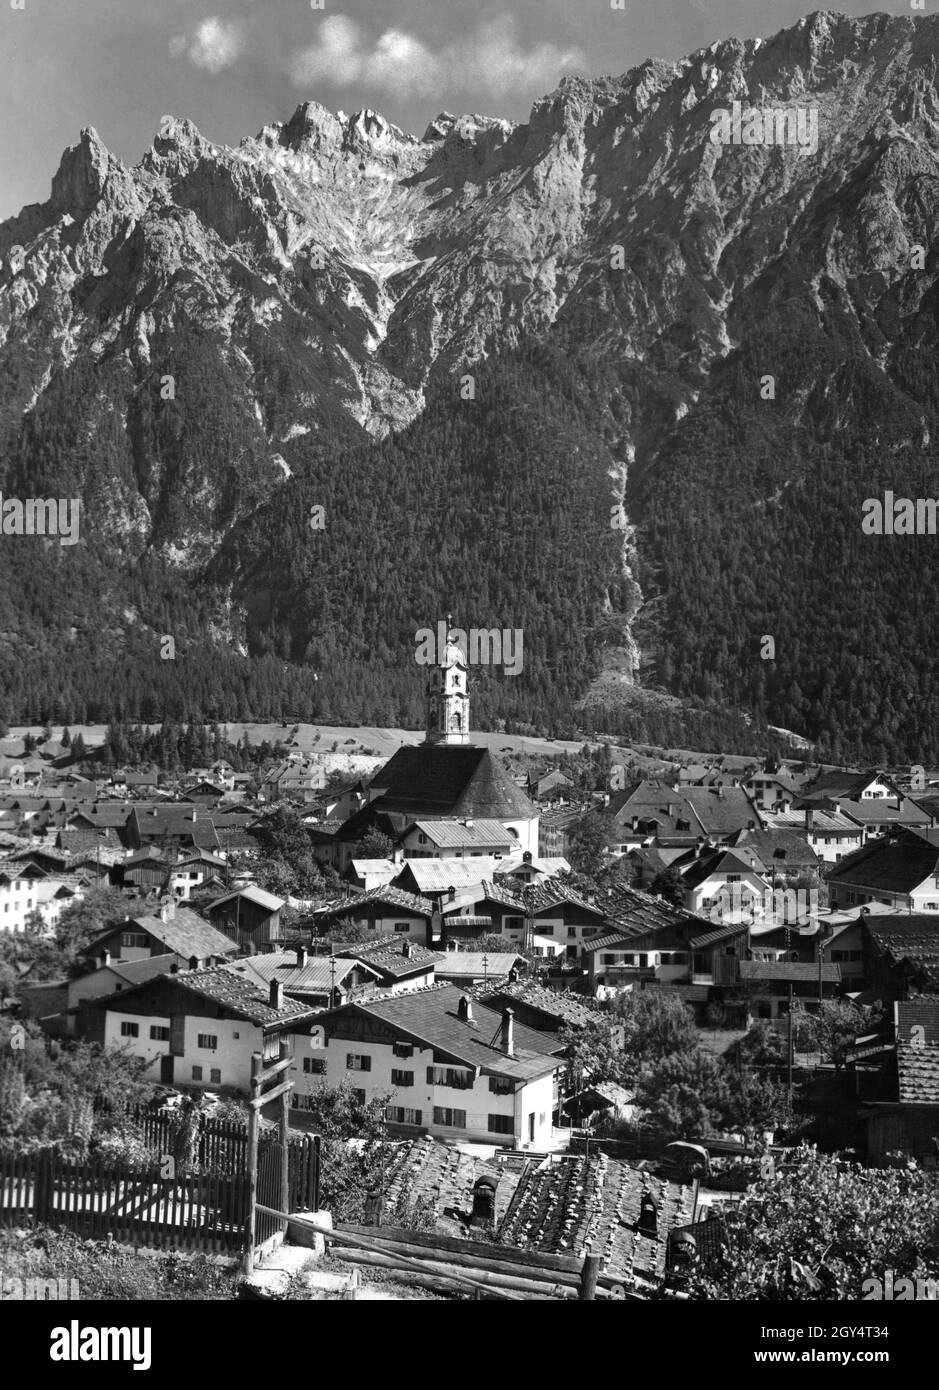 This photograph, taken in 1938, shows the climatic health resort of Mittenwald with the church of St. Peter and Paul in the center. The Northern Karwendel range rises up behind the town. [automated translation] Stock Photo